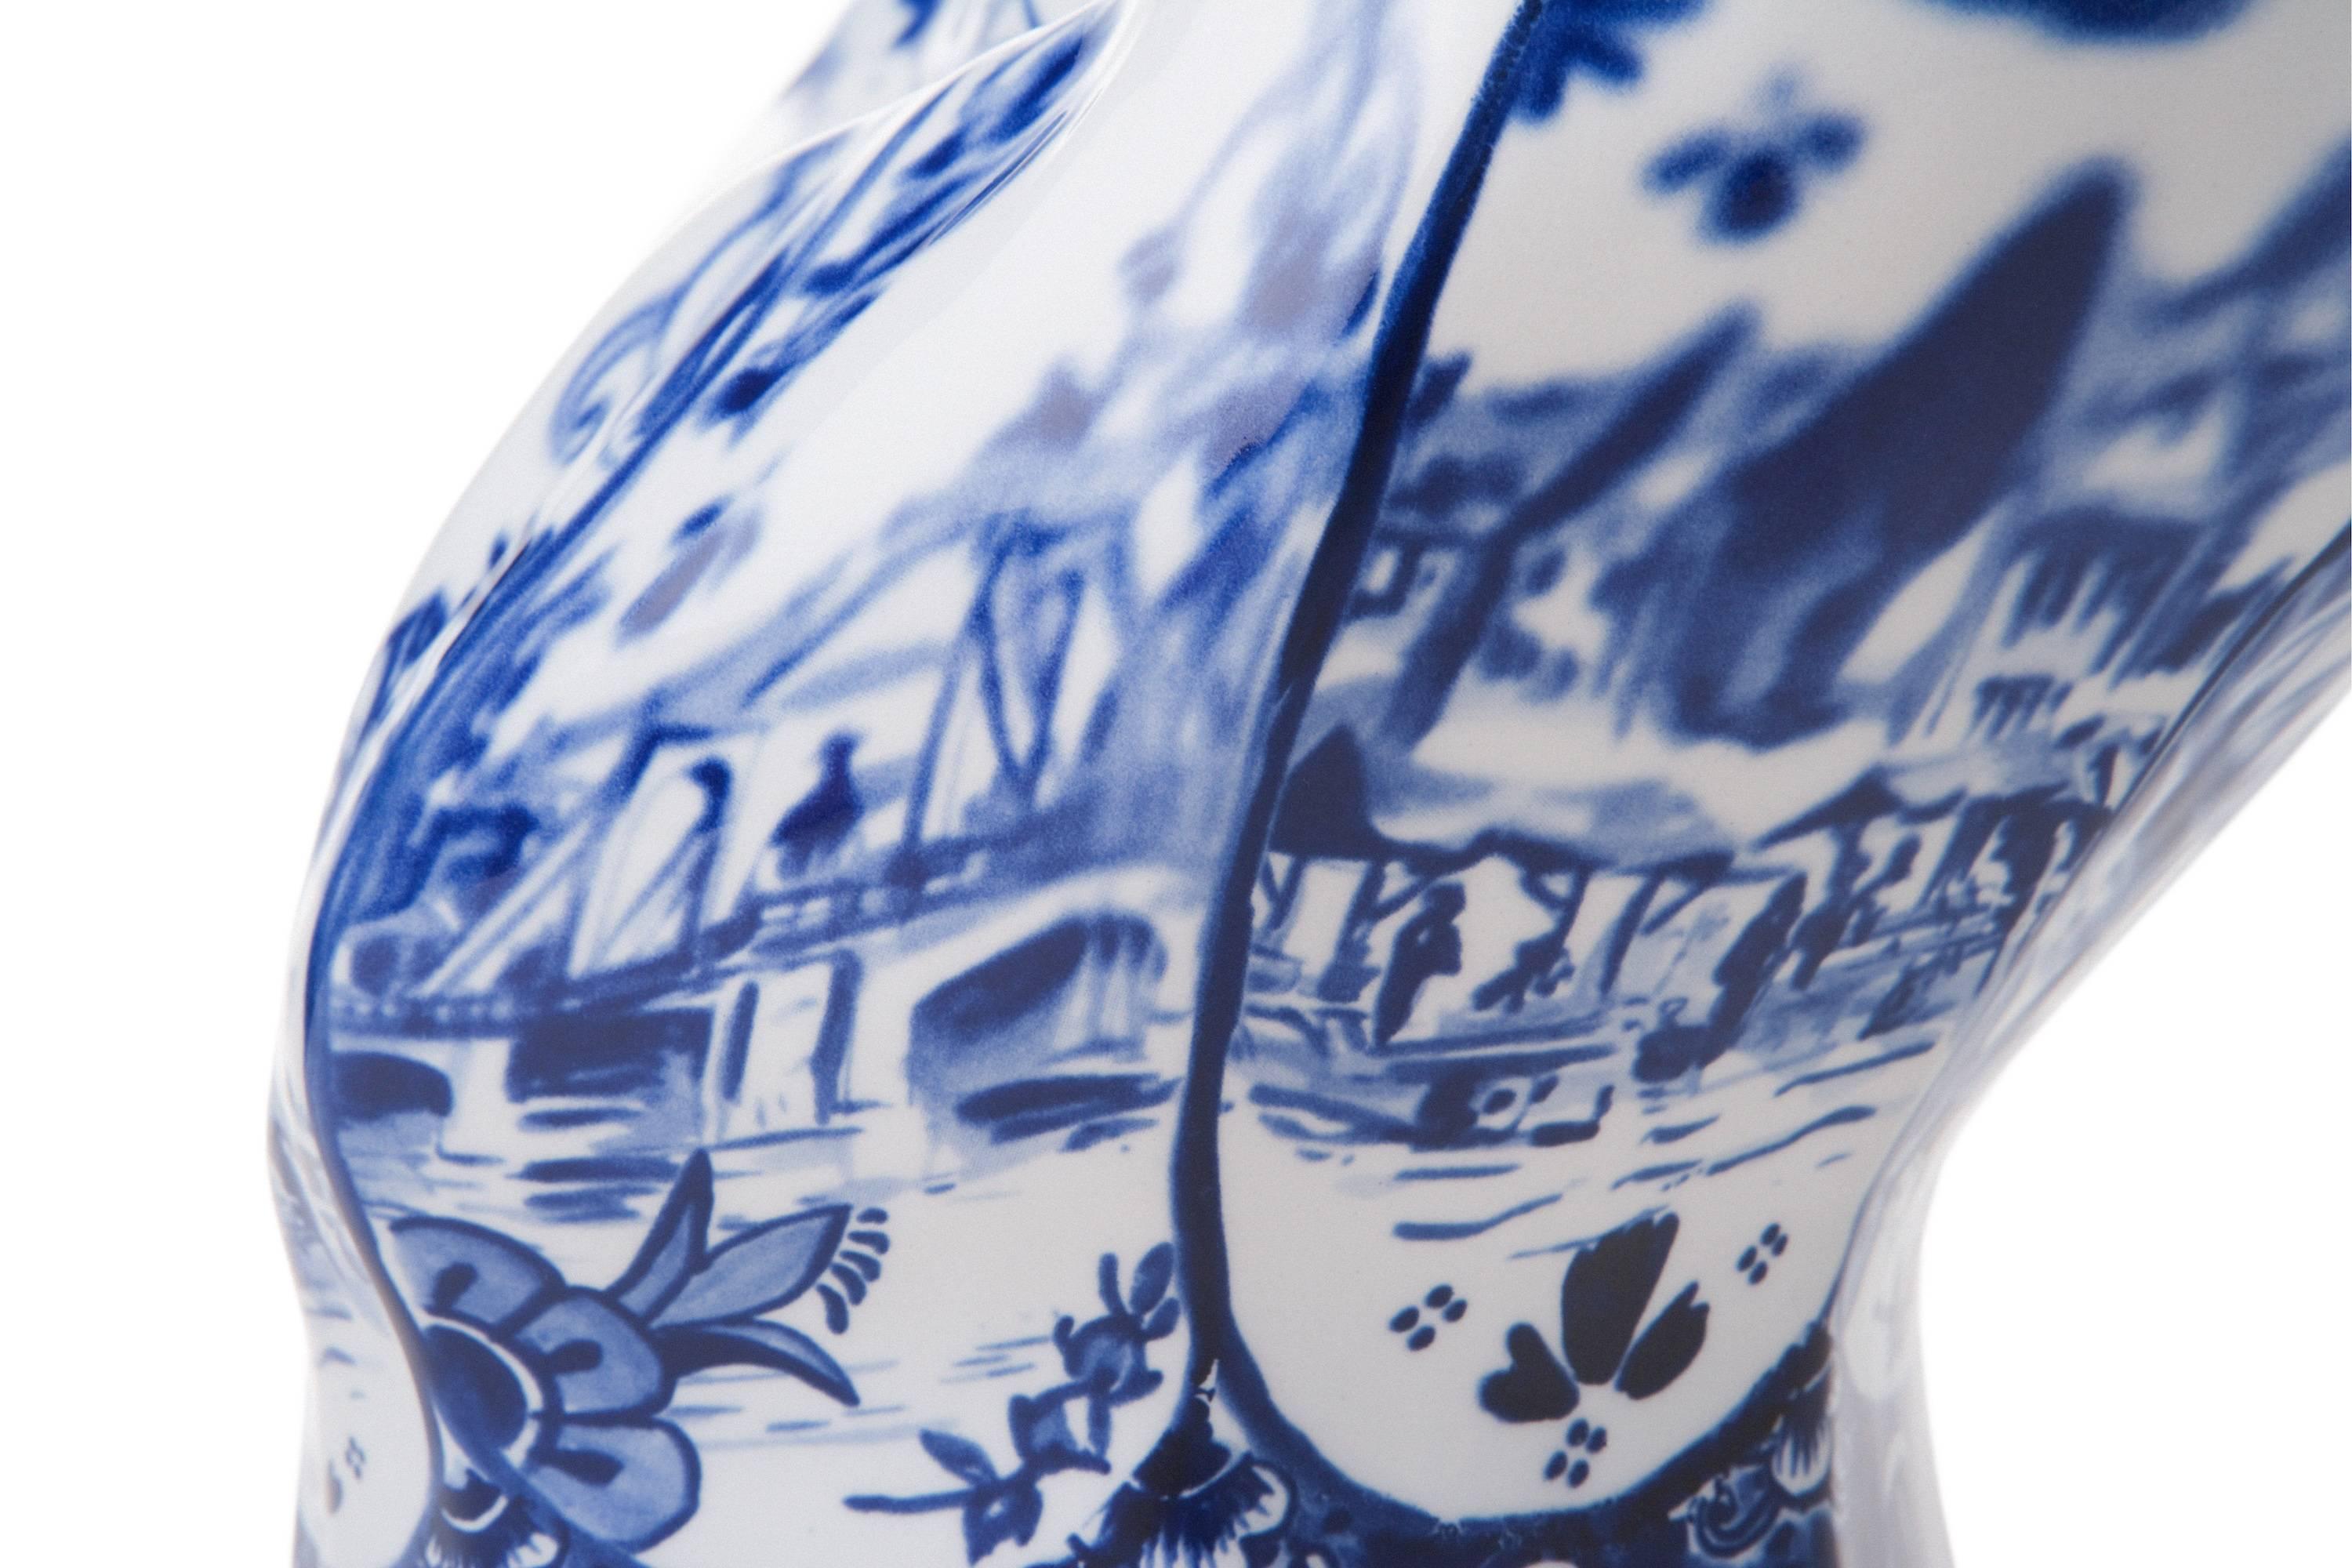 Moooi "Blow Away" Porcelain Vase by Marcel Wanders and Produced by Royal  Delft For Sale at 1stDibs | moooi blow away vase